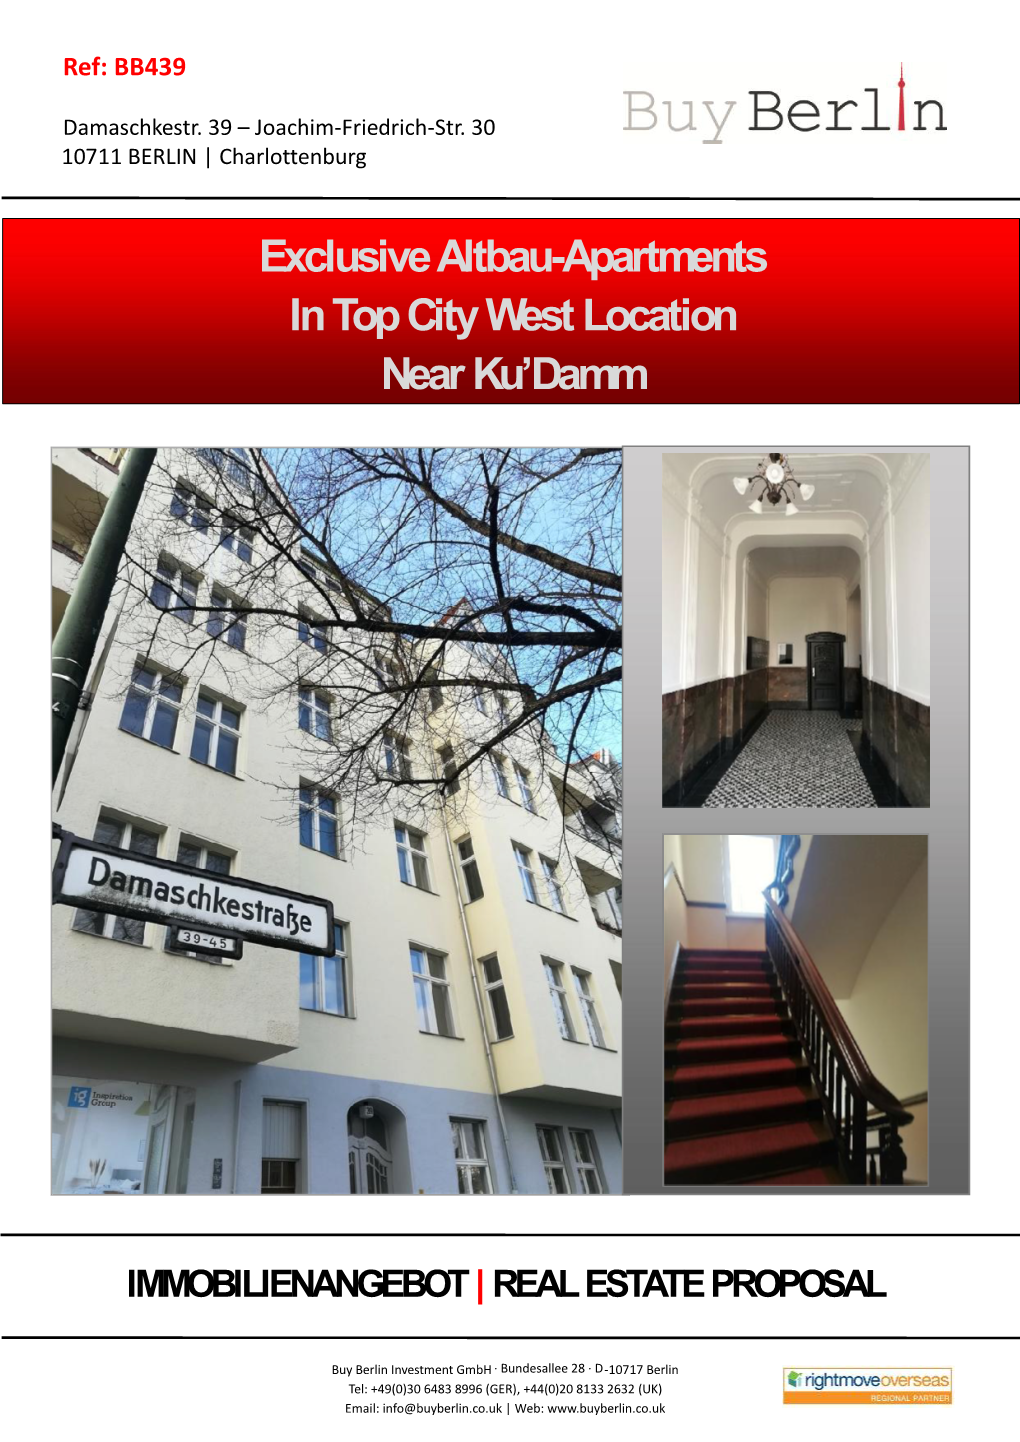 Exclusive Altbau-Apartments in Top City West Location Near Ku'damm